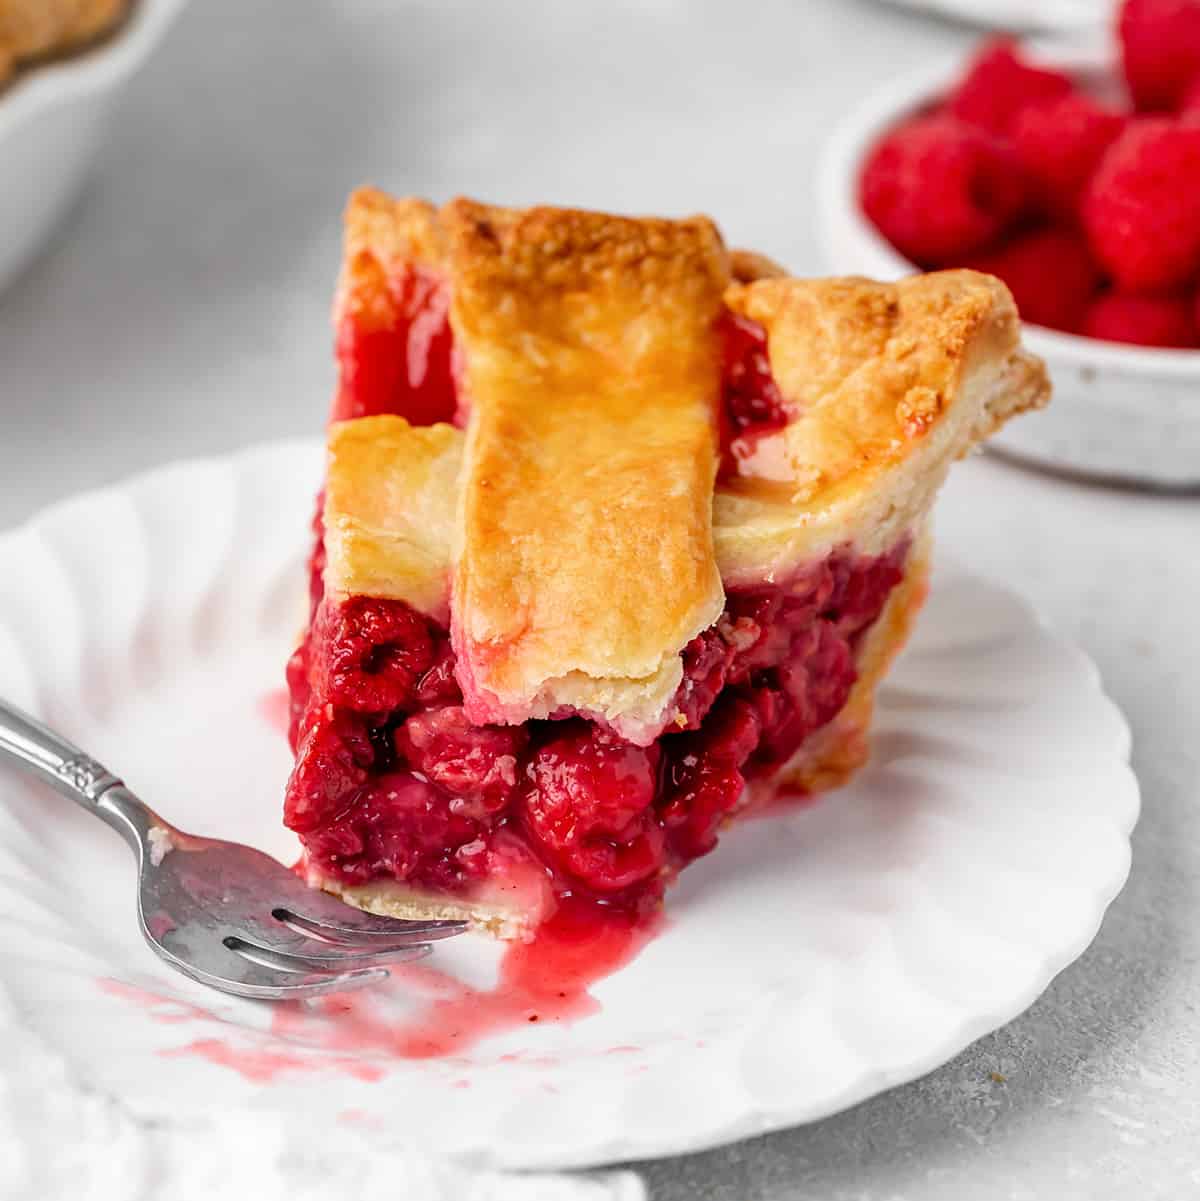 a slice of Raspberry Pie on a plate with a bite taken out of it